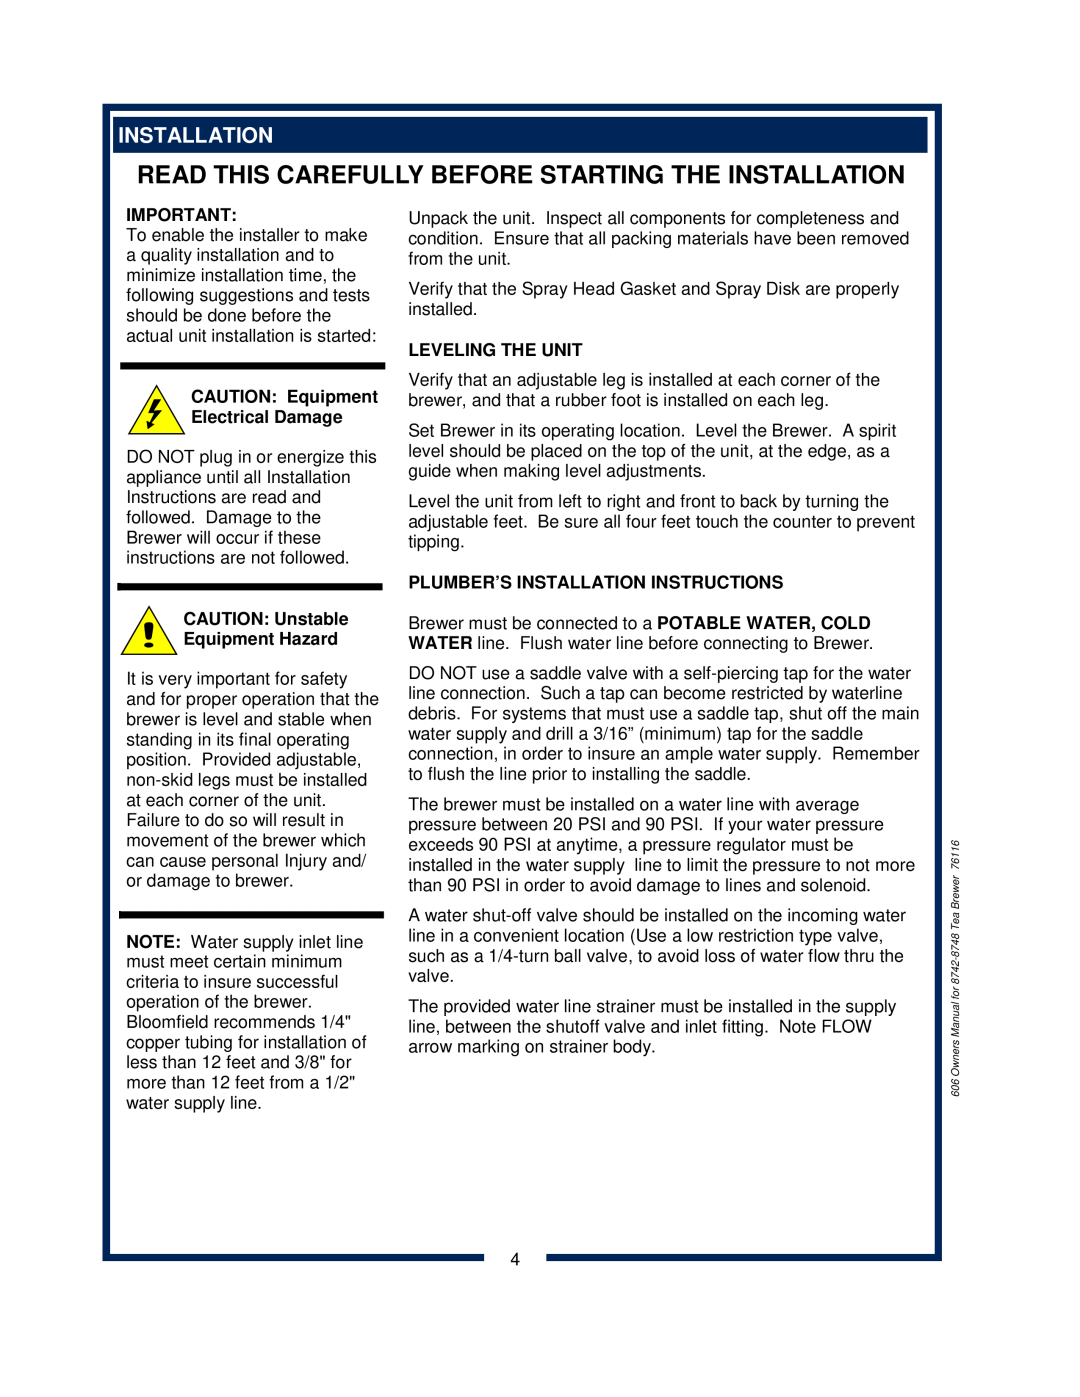 Bloomfield 8742 owner manual CAUTION Unstable Equipment Hazard, Leveling The Unit, Plumber’S Installation Instructions 